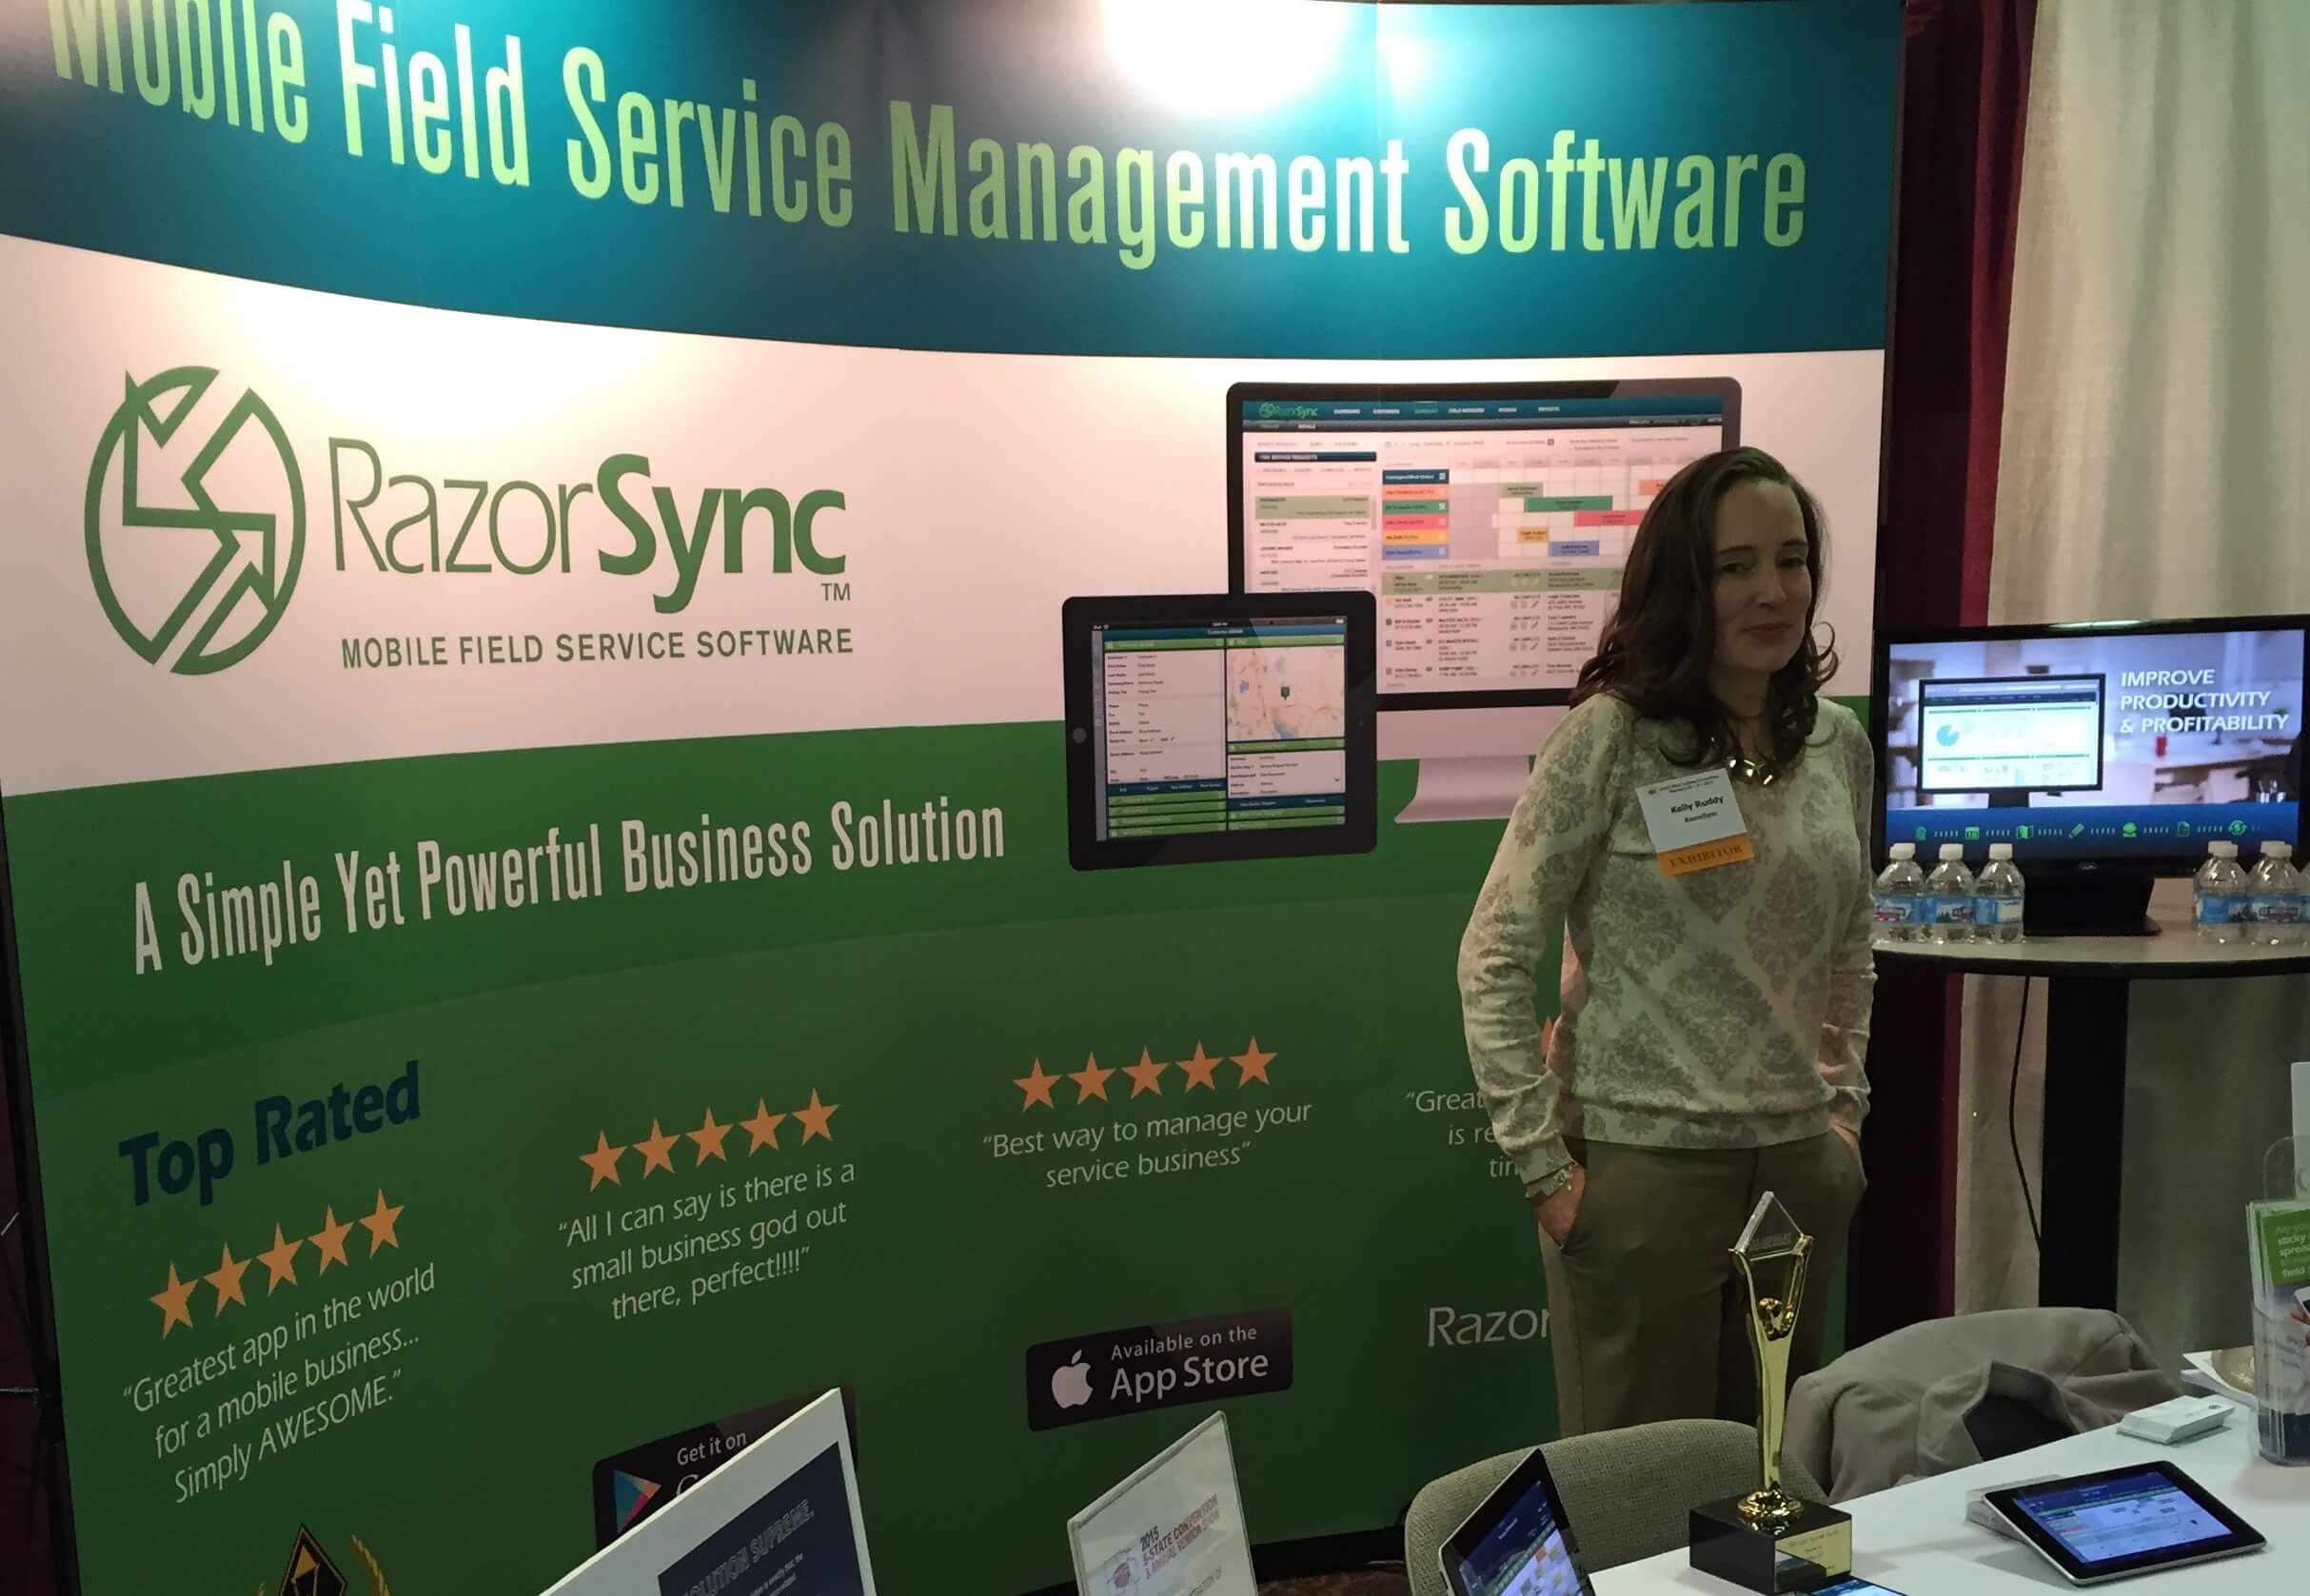 convention booth with banner reading mobile field service management software, razorsynd, a simple yet powerful business solution, and a young woman standing in front of a computer monitor